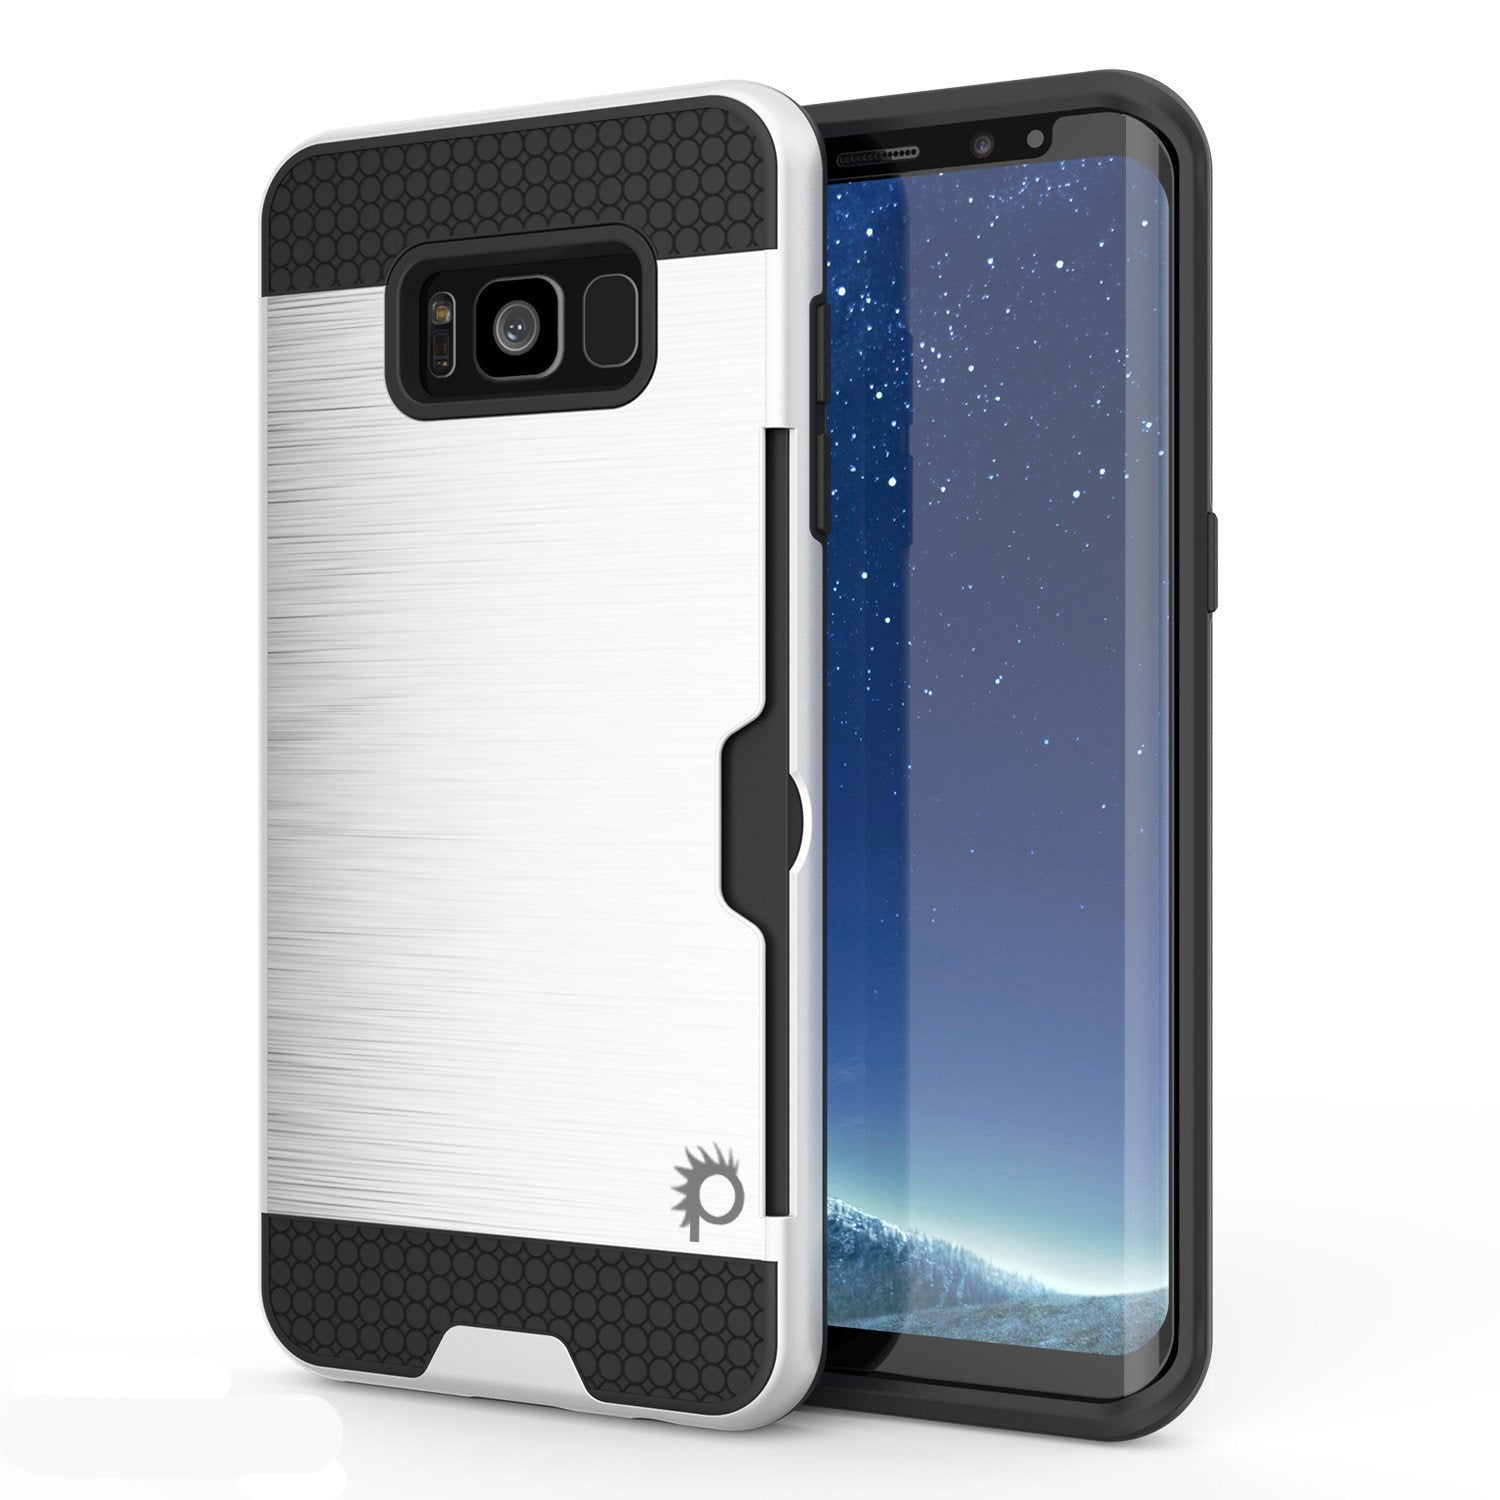 Galaxy S8 Case, PUNKcase [SLOT Series] Dual-Layer Armor Cover w/Integrated Anti-Shock System, Credit Card Slot & Screen Protector [White]